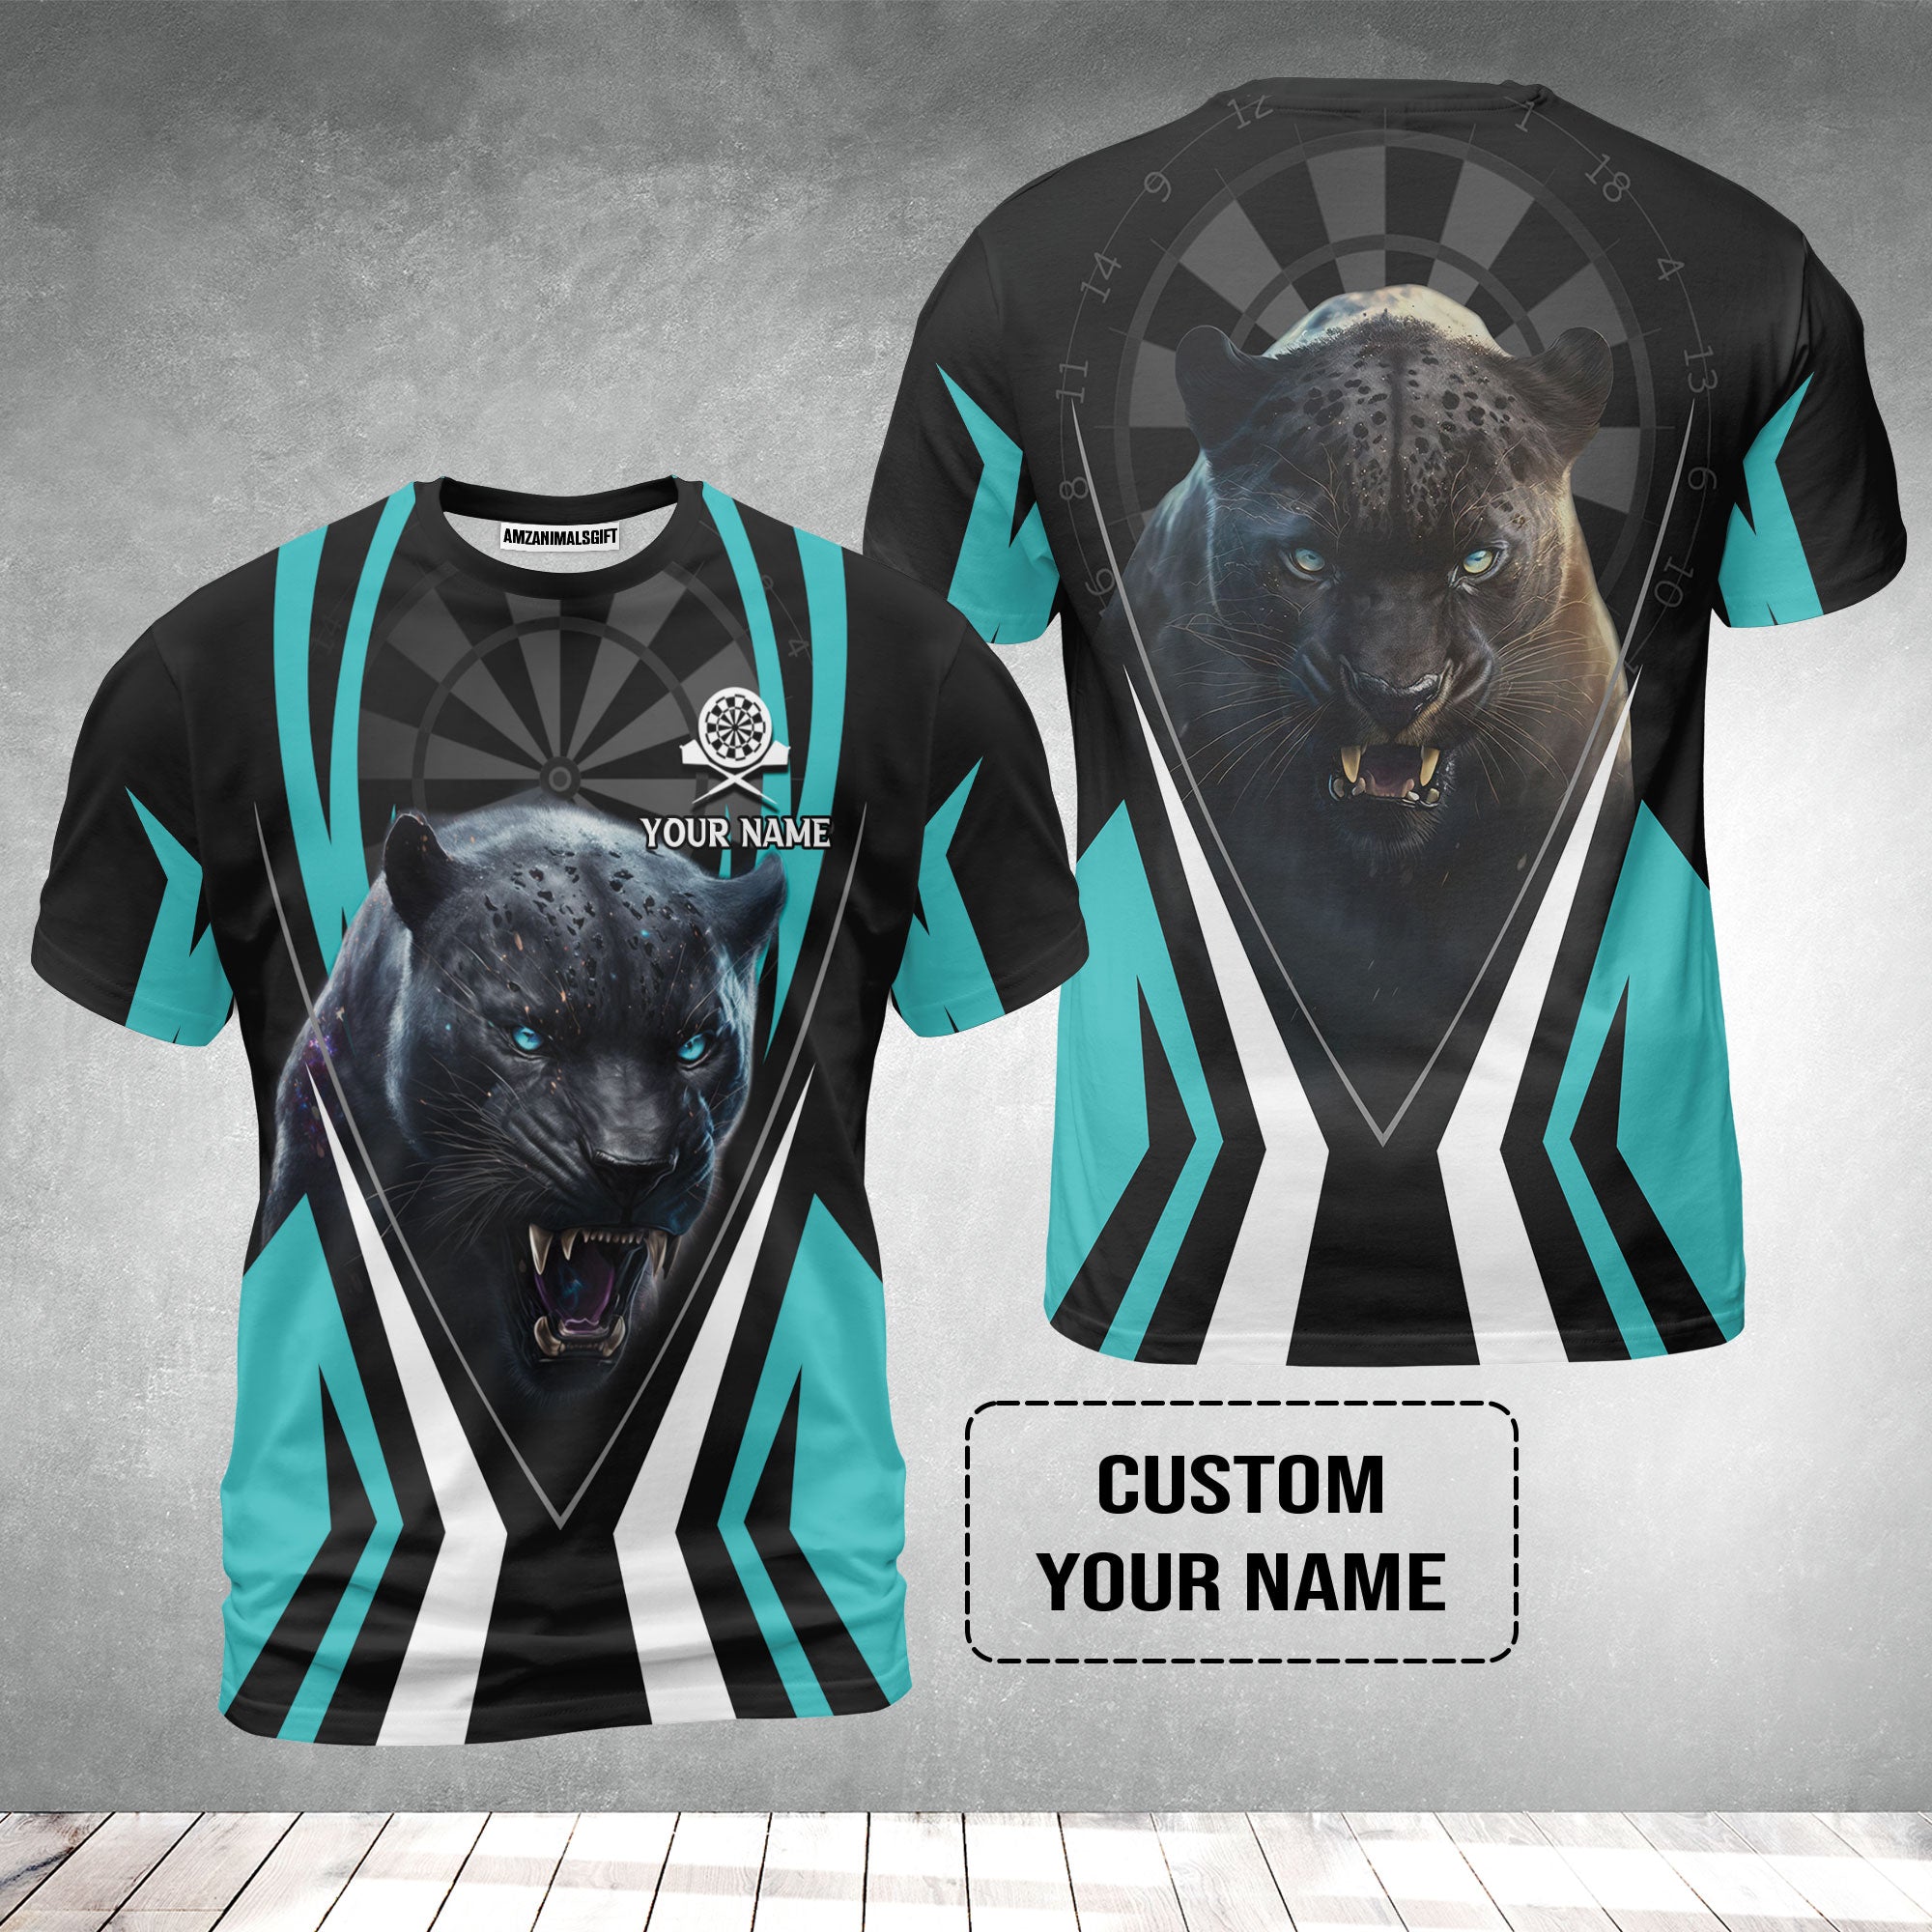 Black Panther And Darts Custom Name T-Shirt, Bullseye Dartboard Personalized T-Shirt - Gift For Darts Lovers, Friends